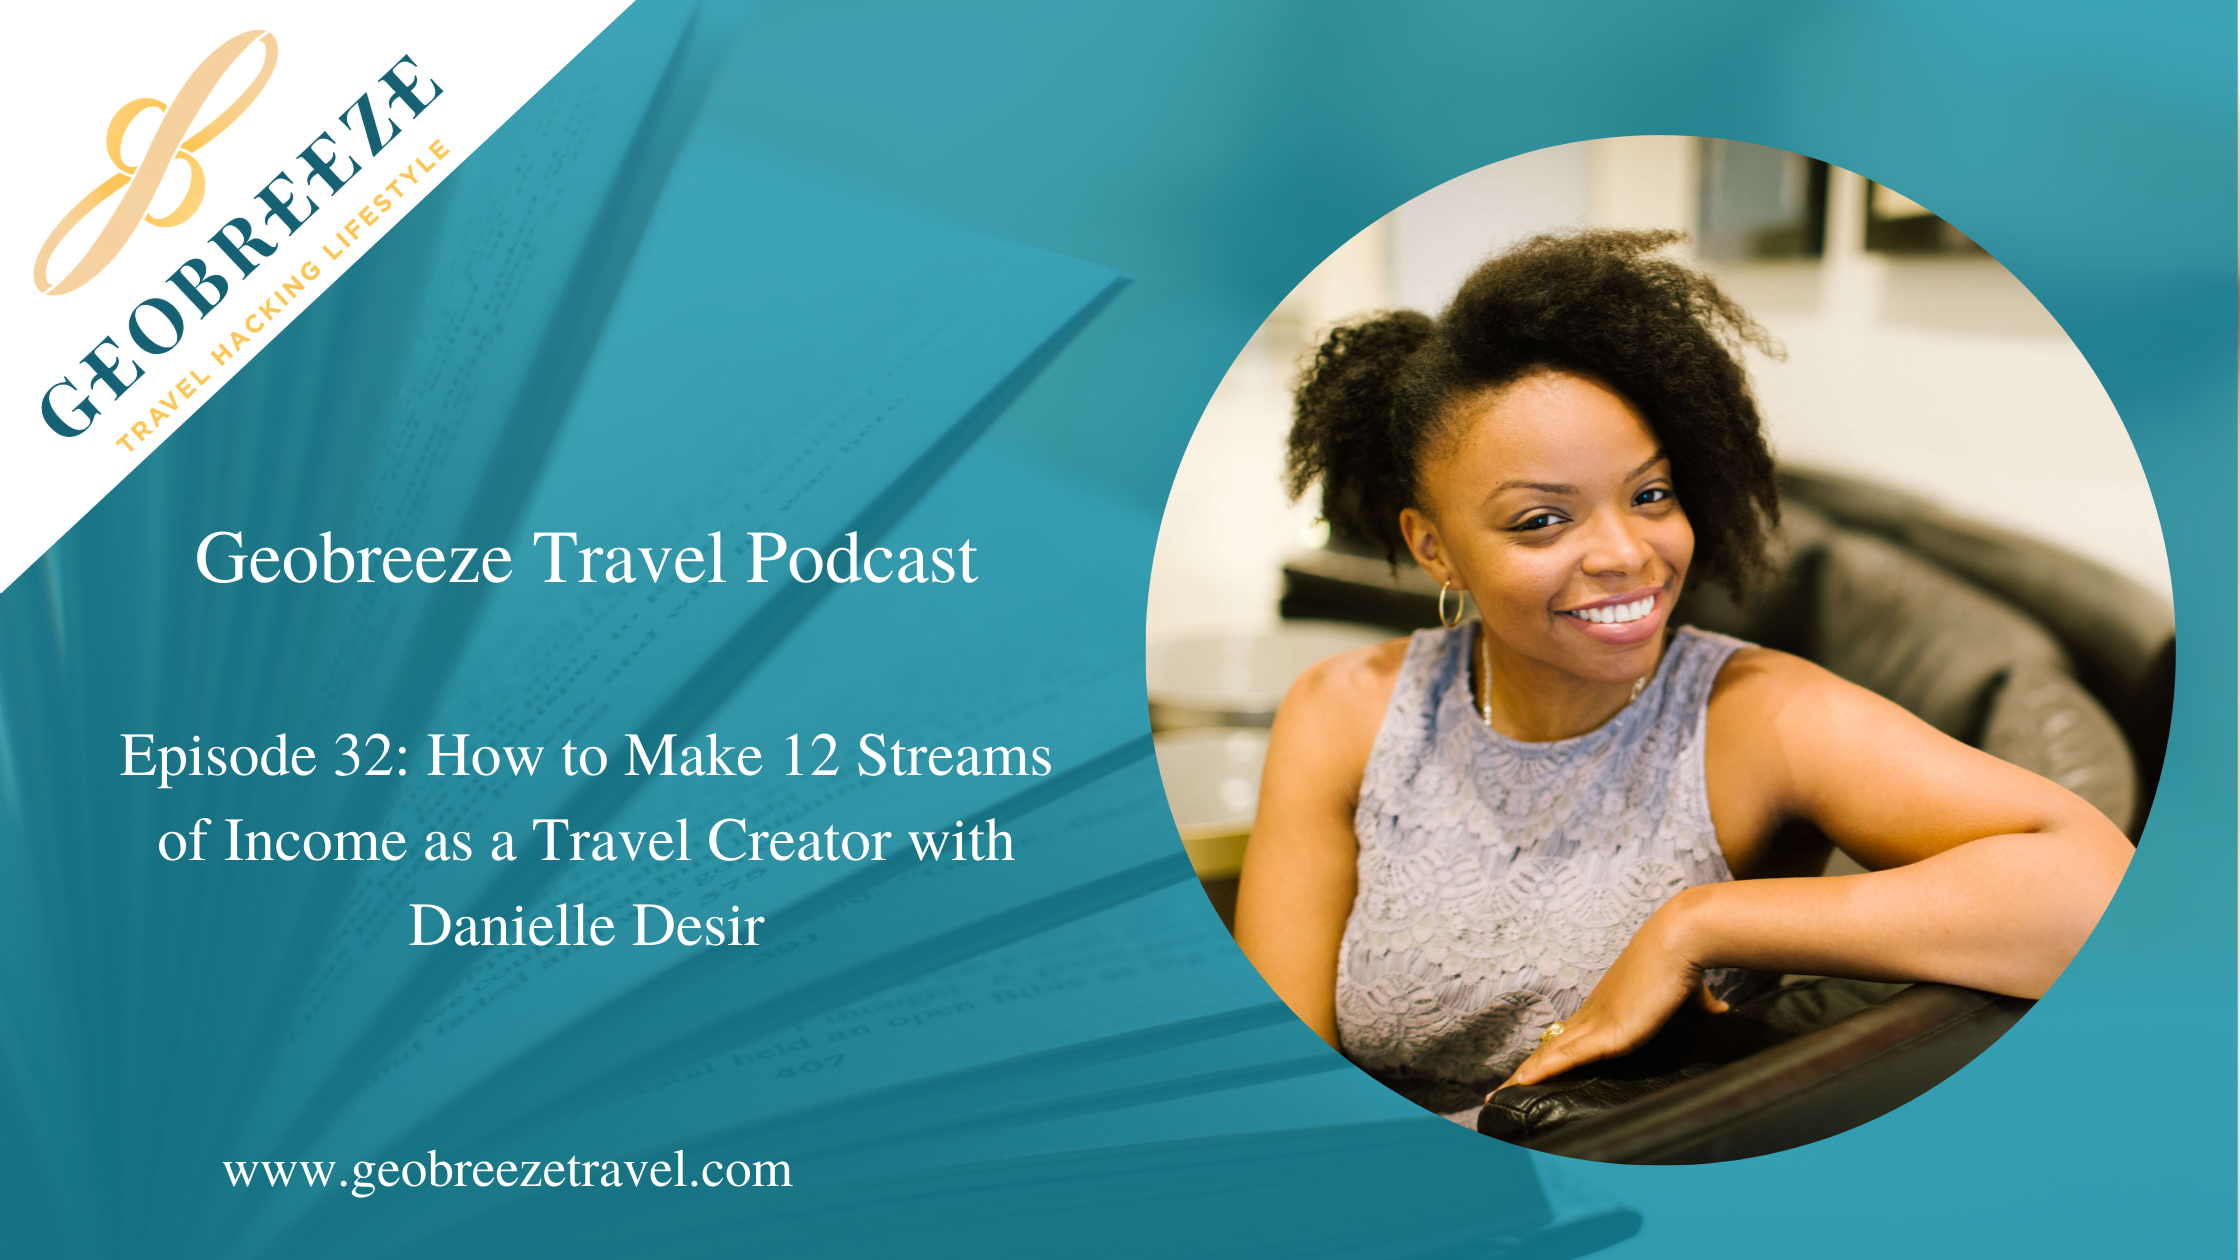 Episode 32: How to Make 12 Streams of Income as a Travel Creator with Danielle Desir